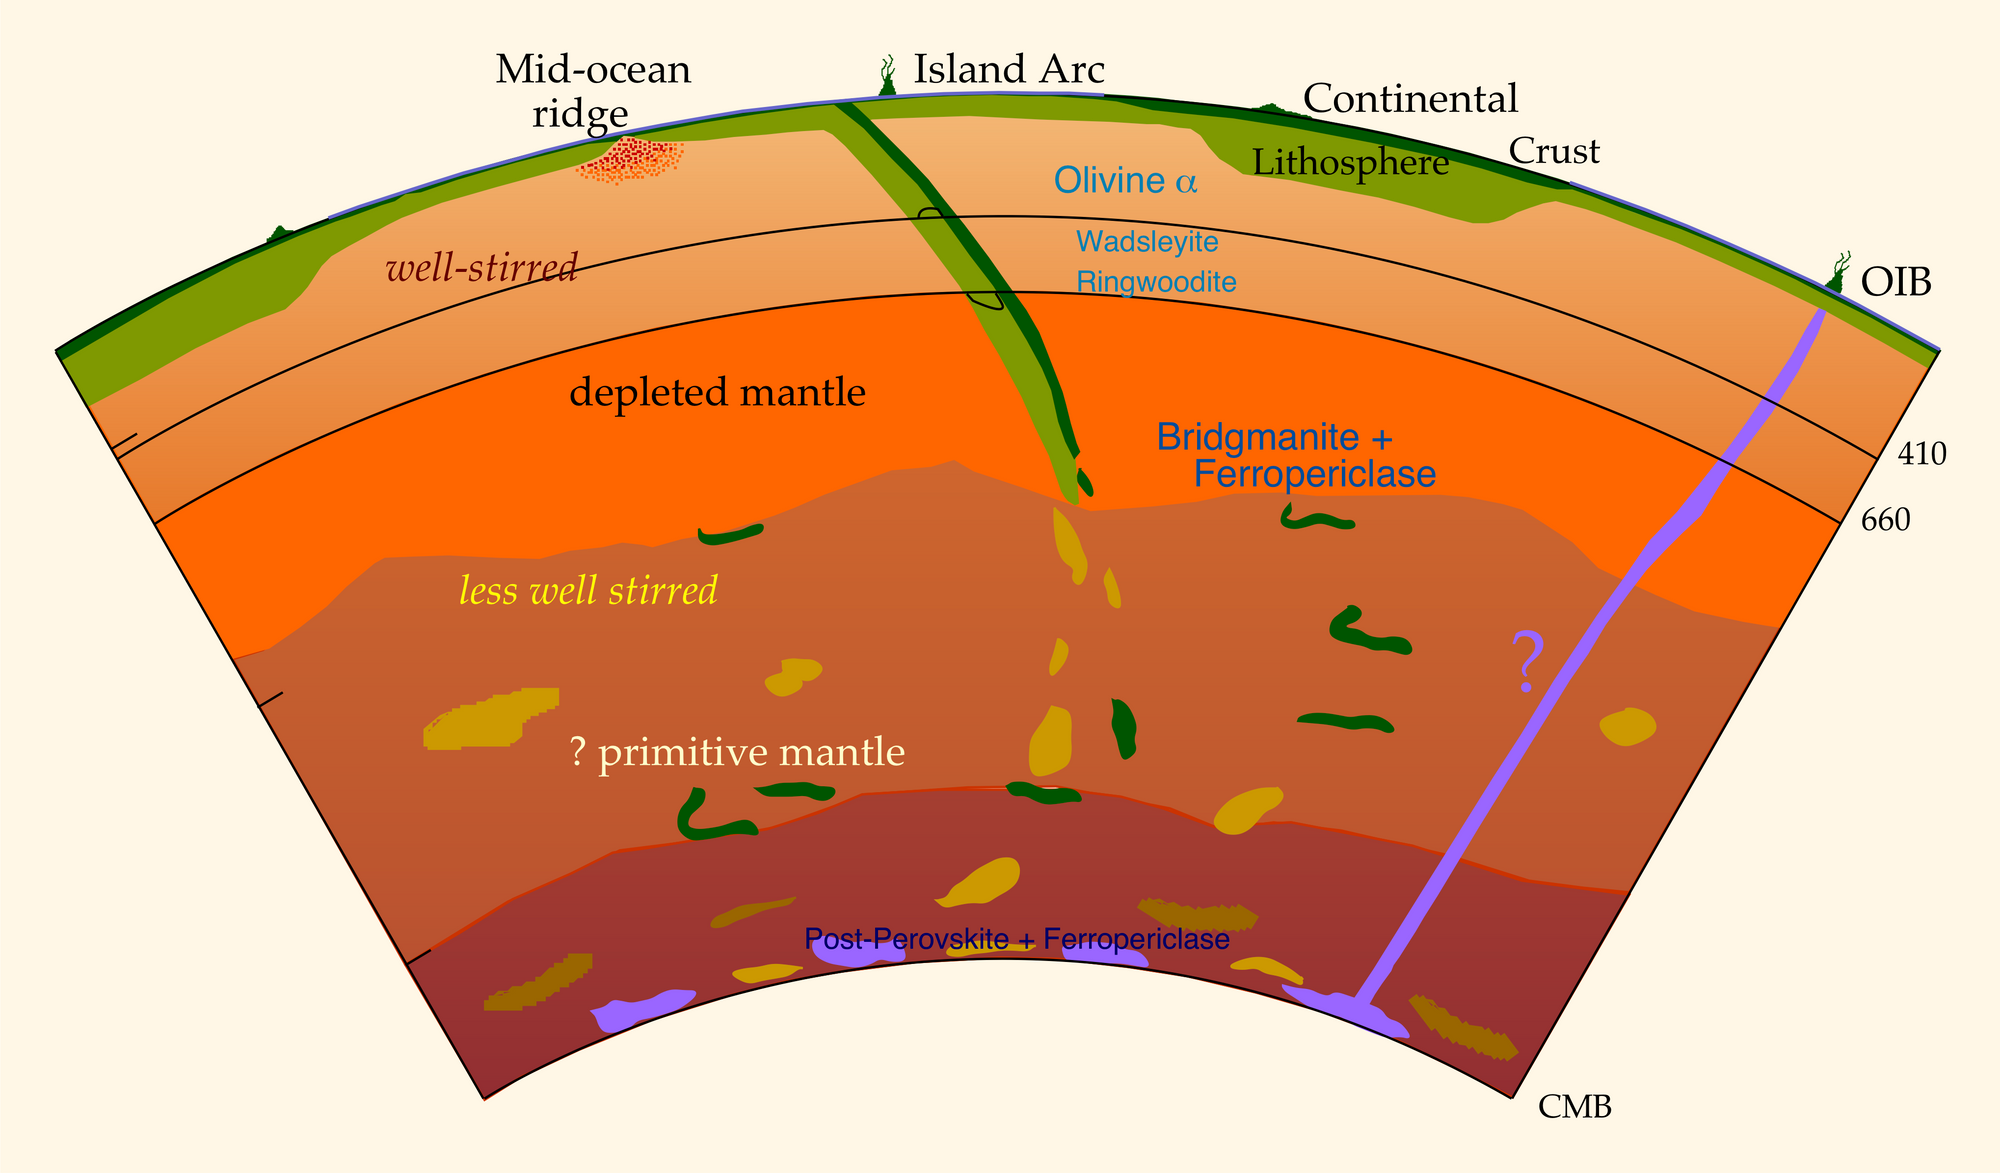 Seismological Models, mineral physics and spin transitions in the lower mantle